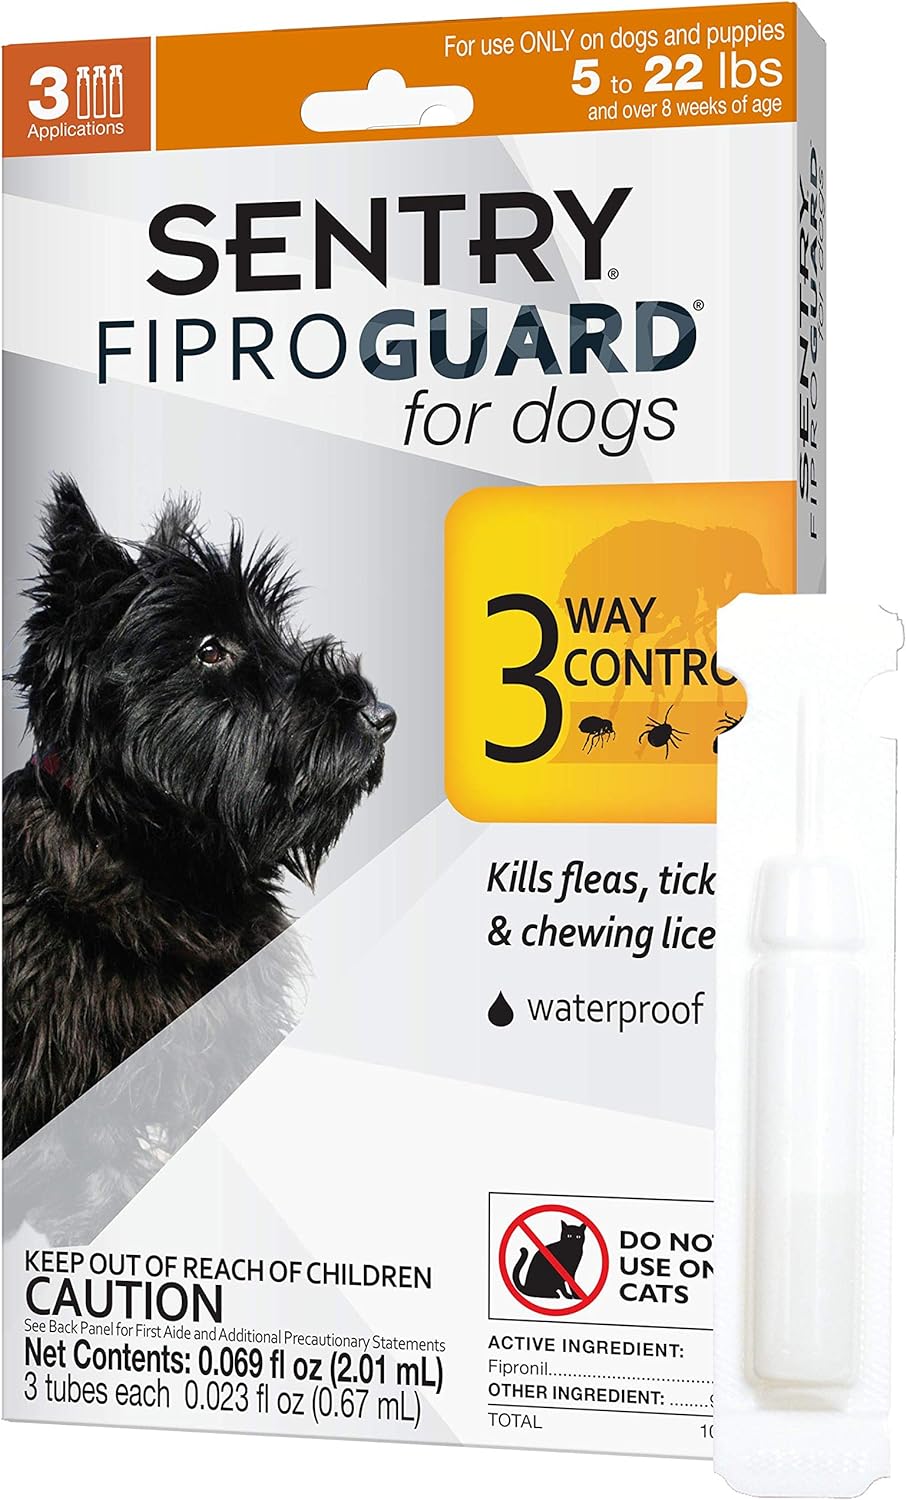 SENTRY PET CARE SENTRY Fiproguard for Dogs, Flea and Tick Pr